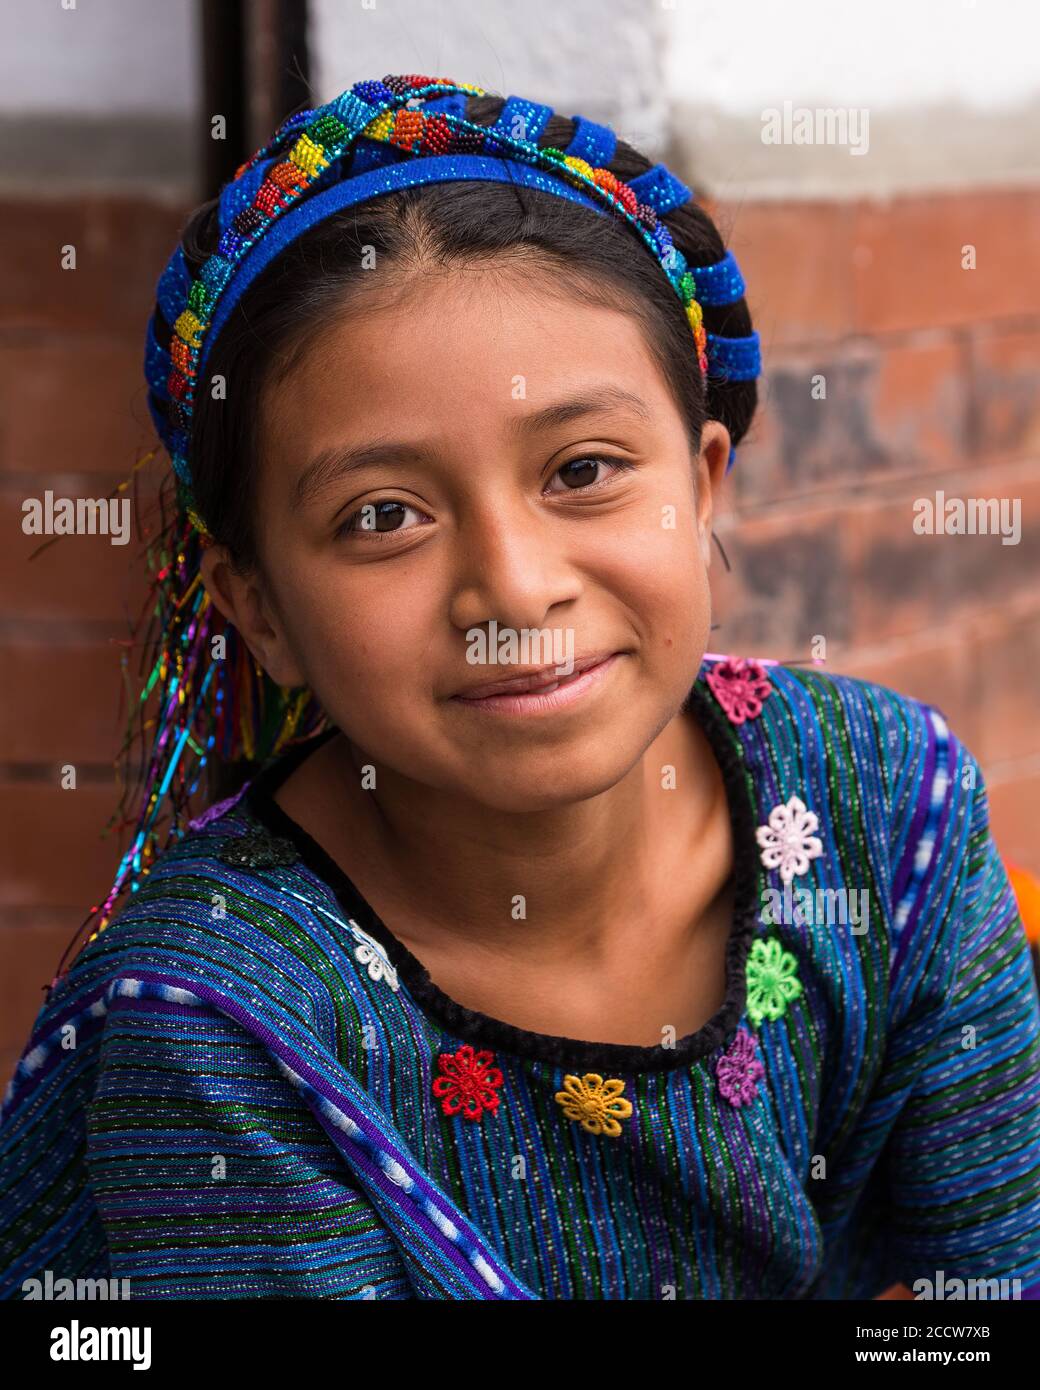 A young Cakchiquel Mayan girl in the traditional dress of San Antonio Palopo, Guatemala, including a blue woven huipil blouse and cinta or decorative Stock Photo